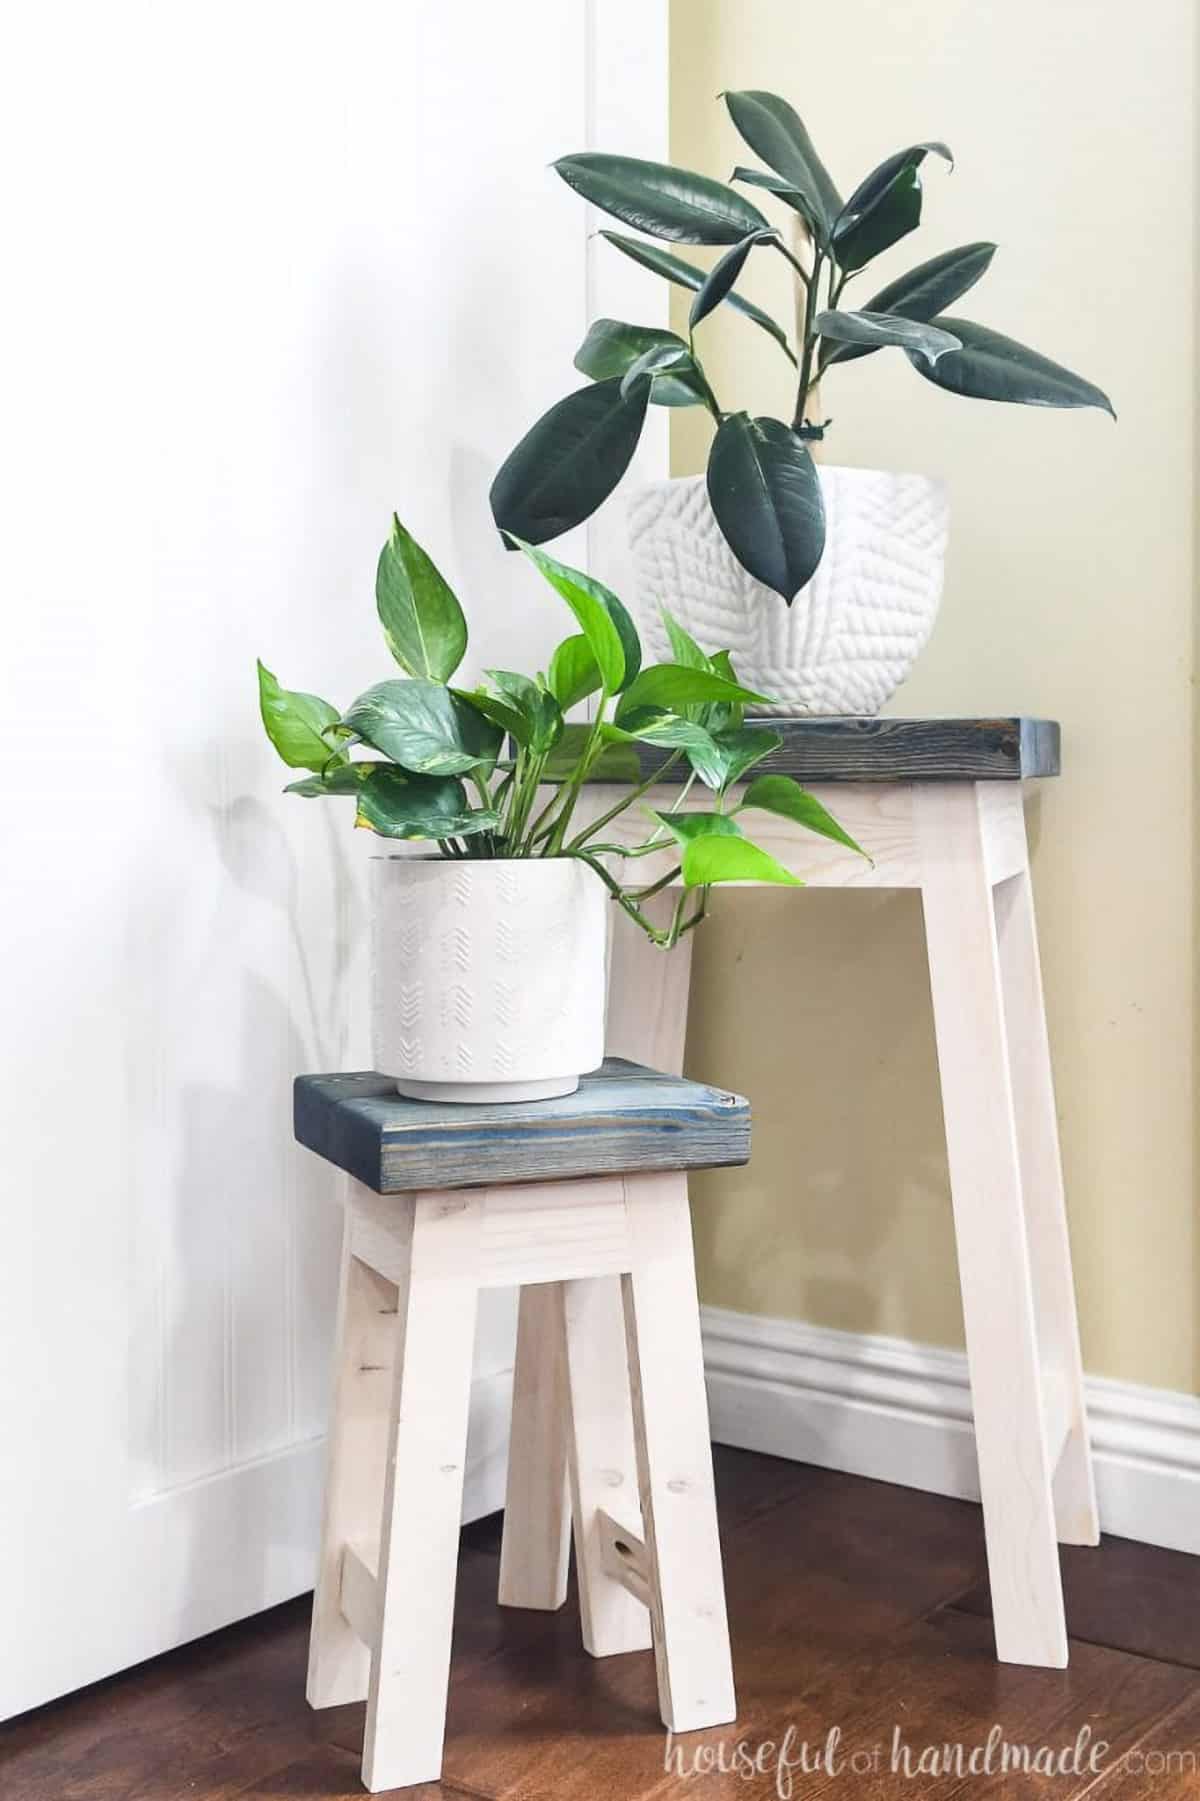 DIY nesting stools with gray stained tops and white legs holding white textured pots with rubber plant and pothos.